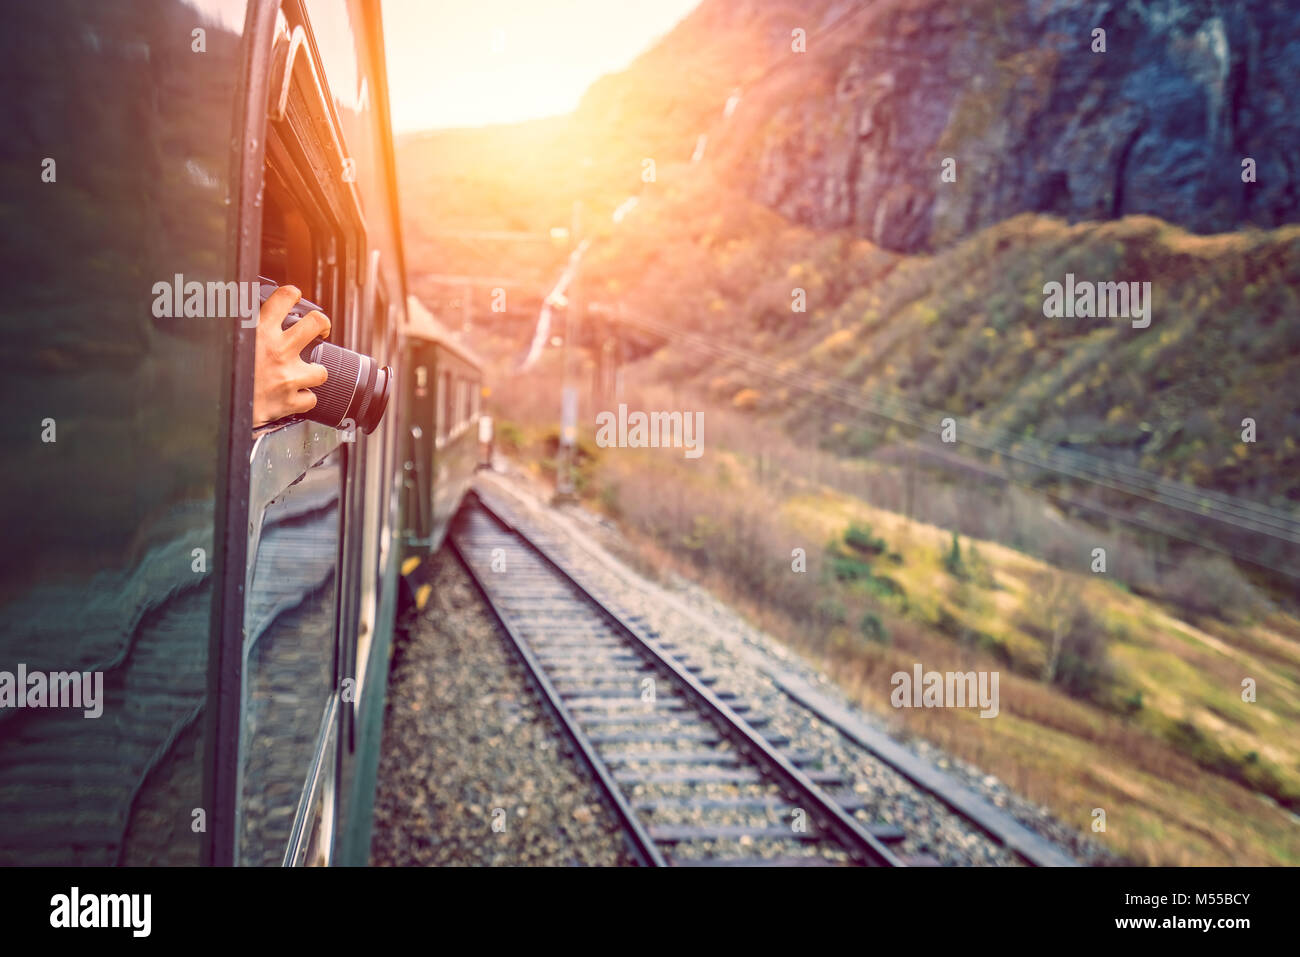 Taking pictures of landscape from a train window Stock Photo - Alamy